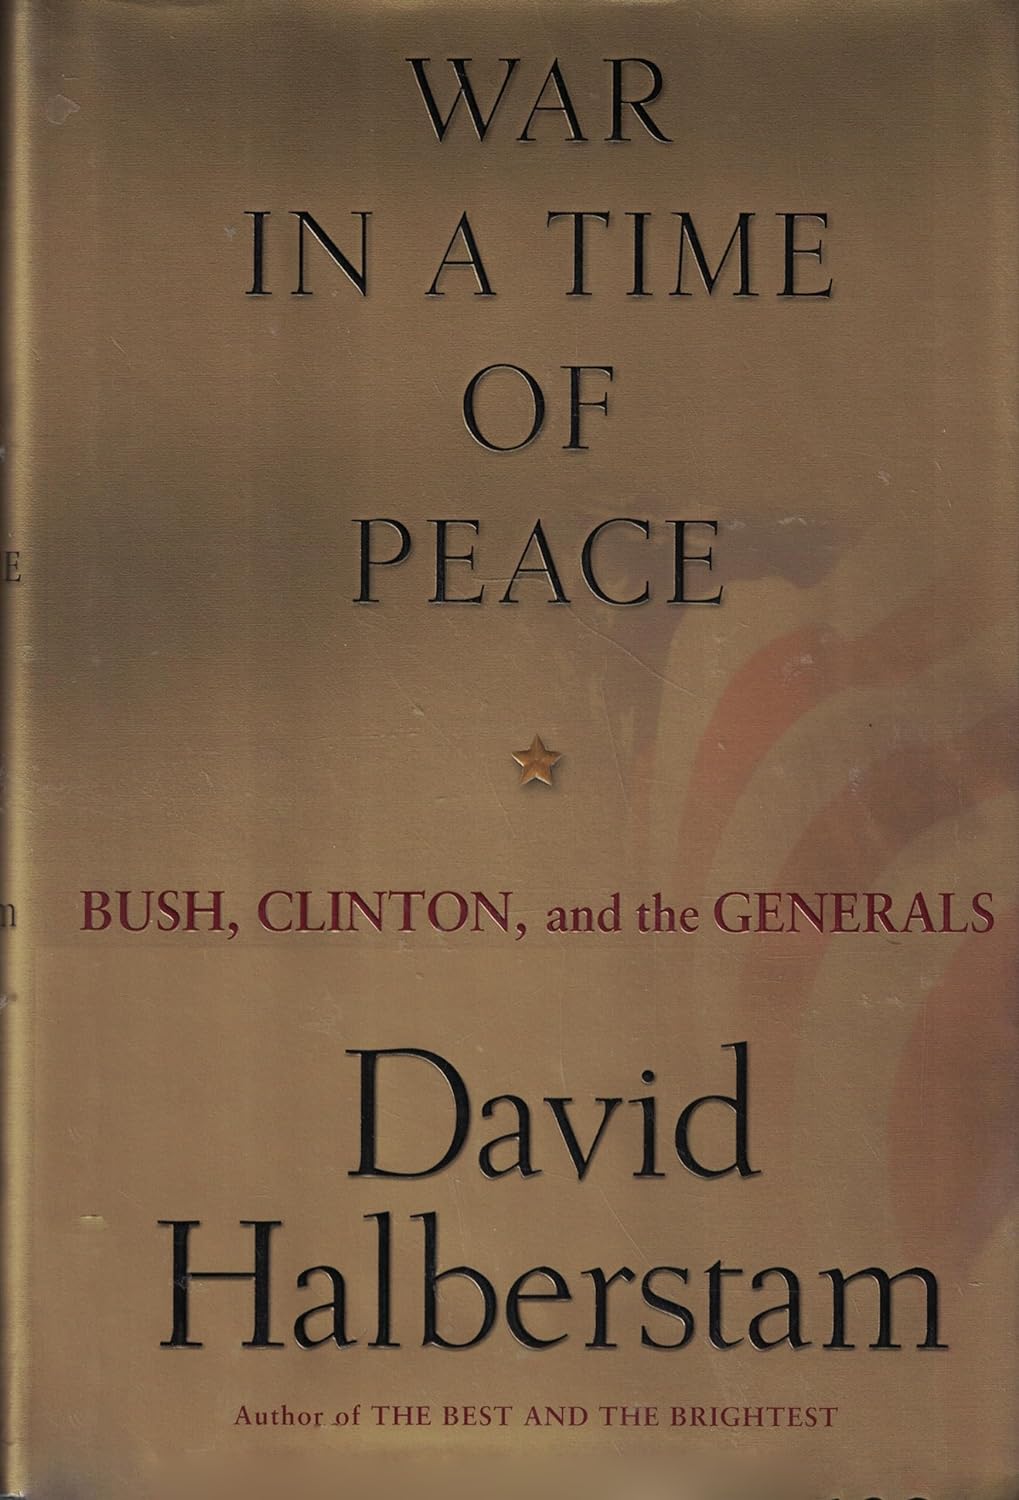 War in a Time of Peace: Bush, Clinton, and the Generals book by David Halberstam